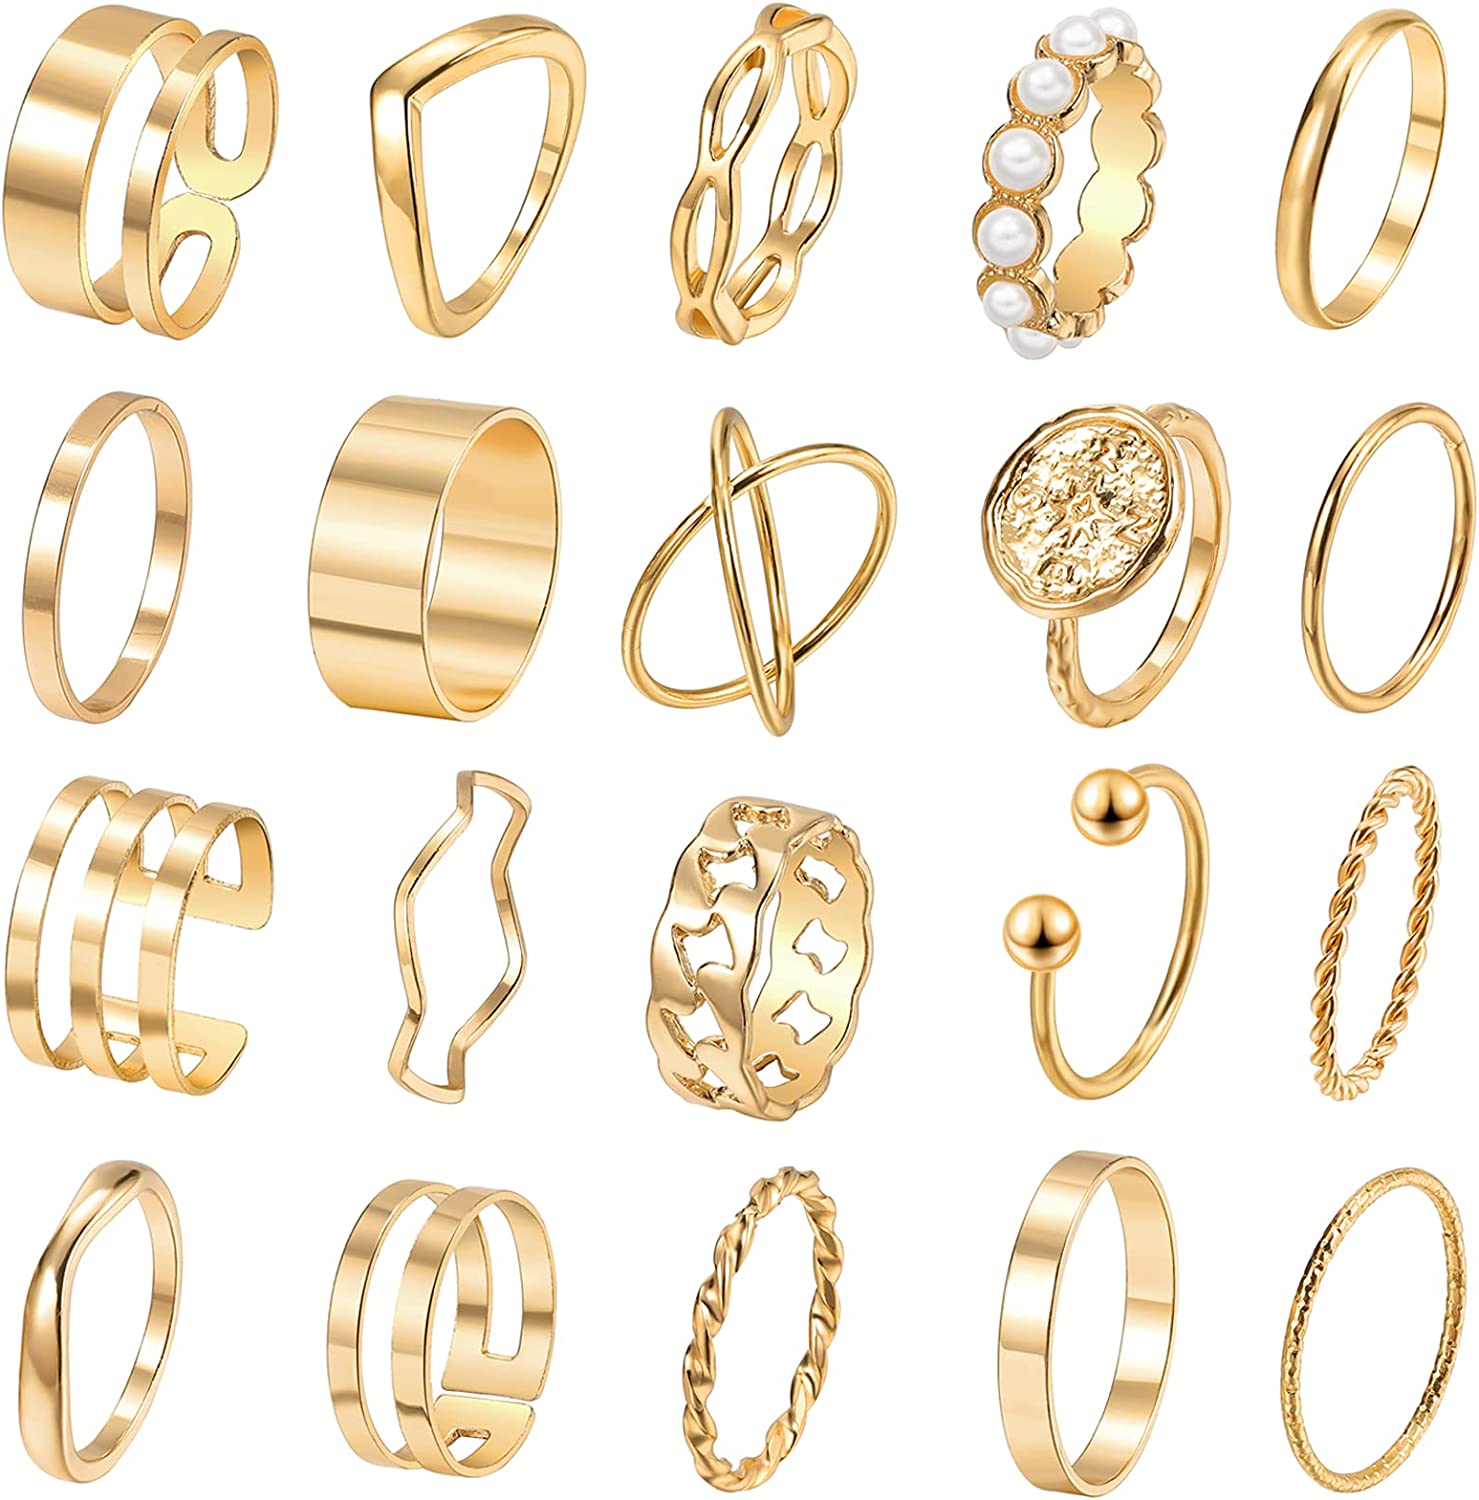 Gold Knuckle Rings Set for Women, 10 Pcs Trendy Simple Midi Rings Gold Plated Statement Stackable Rings Pack